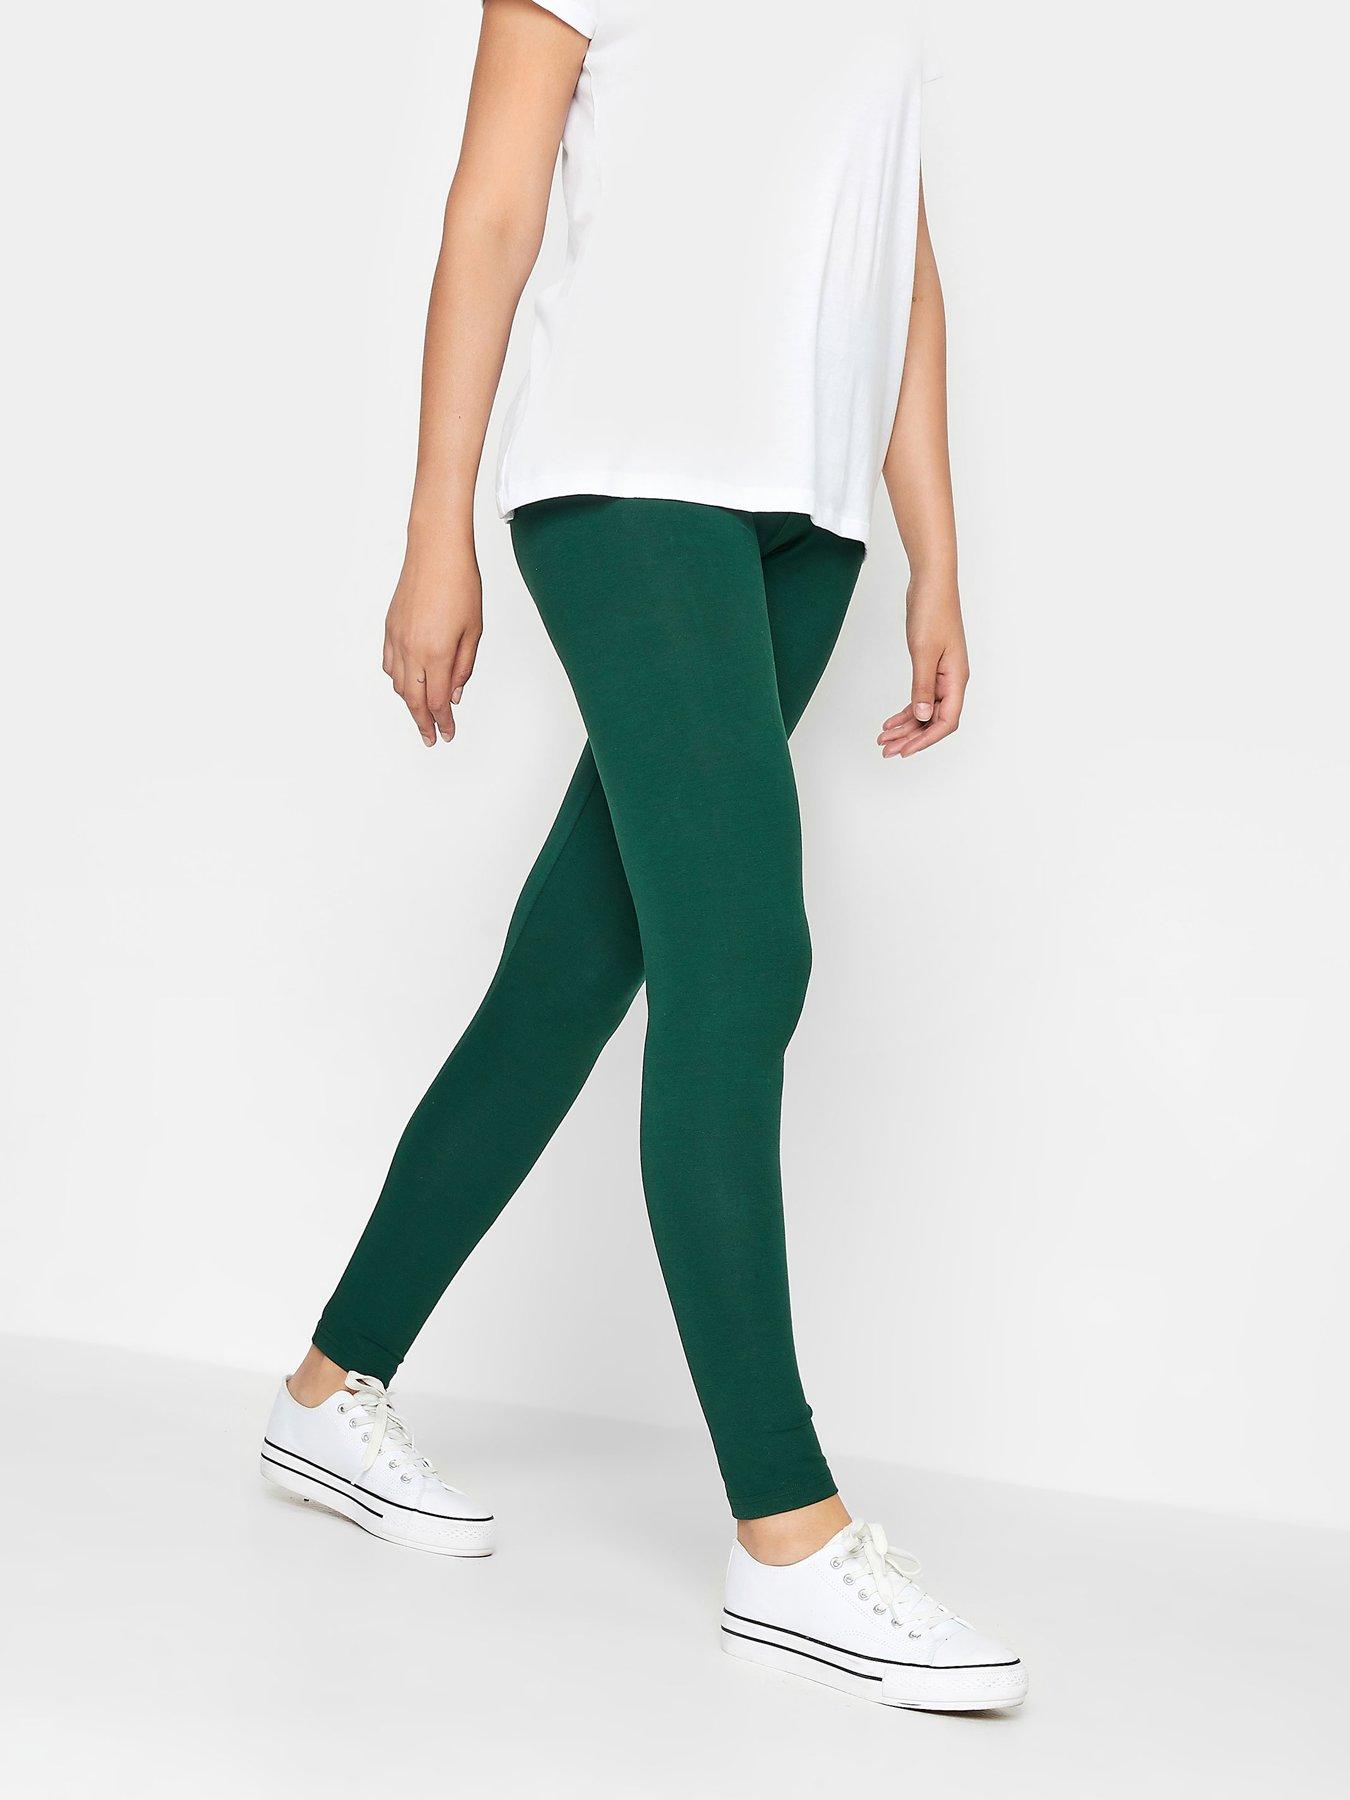 Long Tall Sally 2 Pack Legging Green And Black